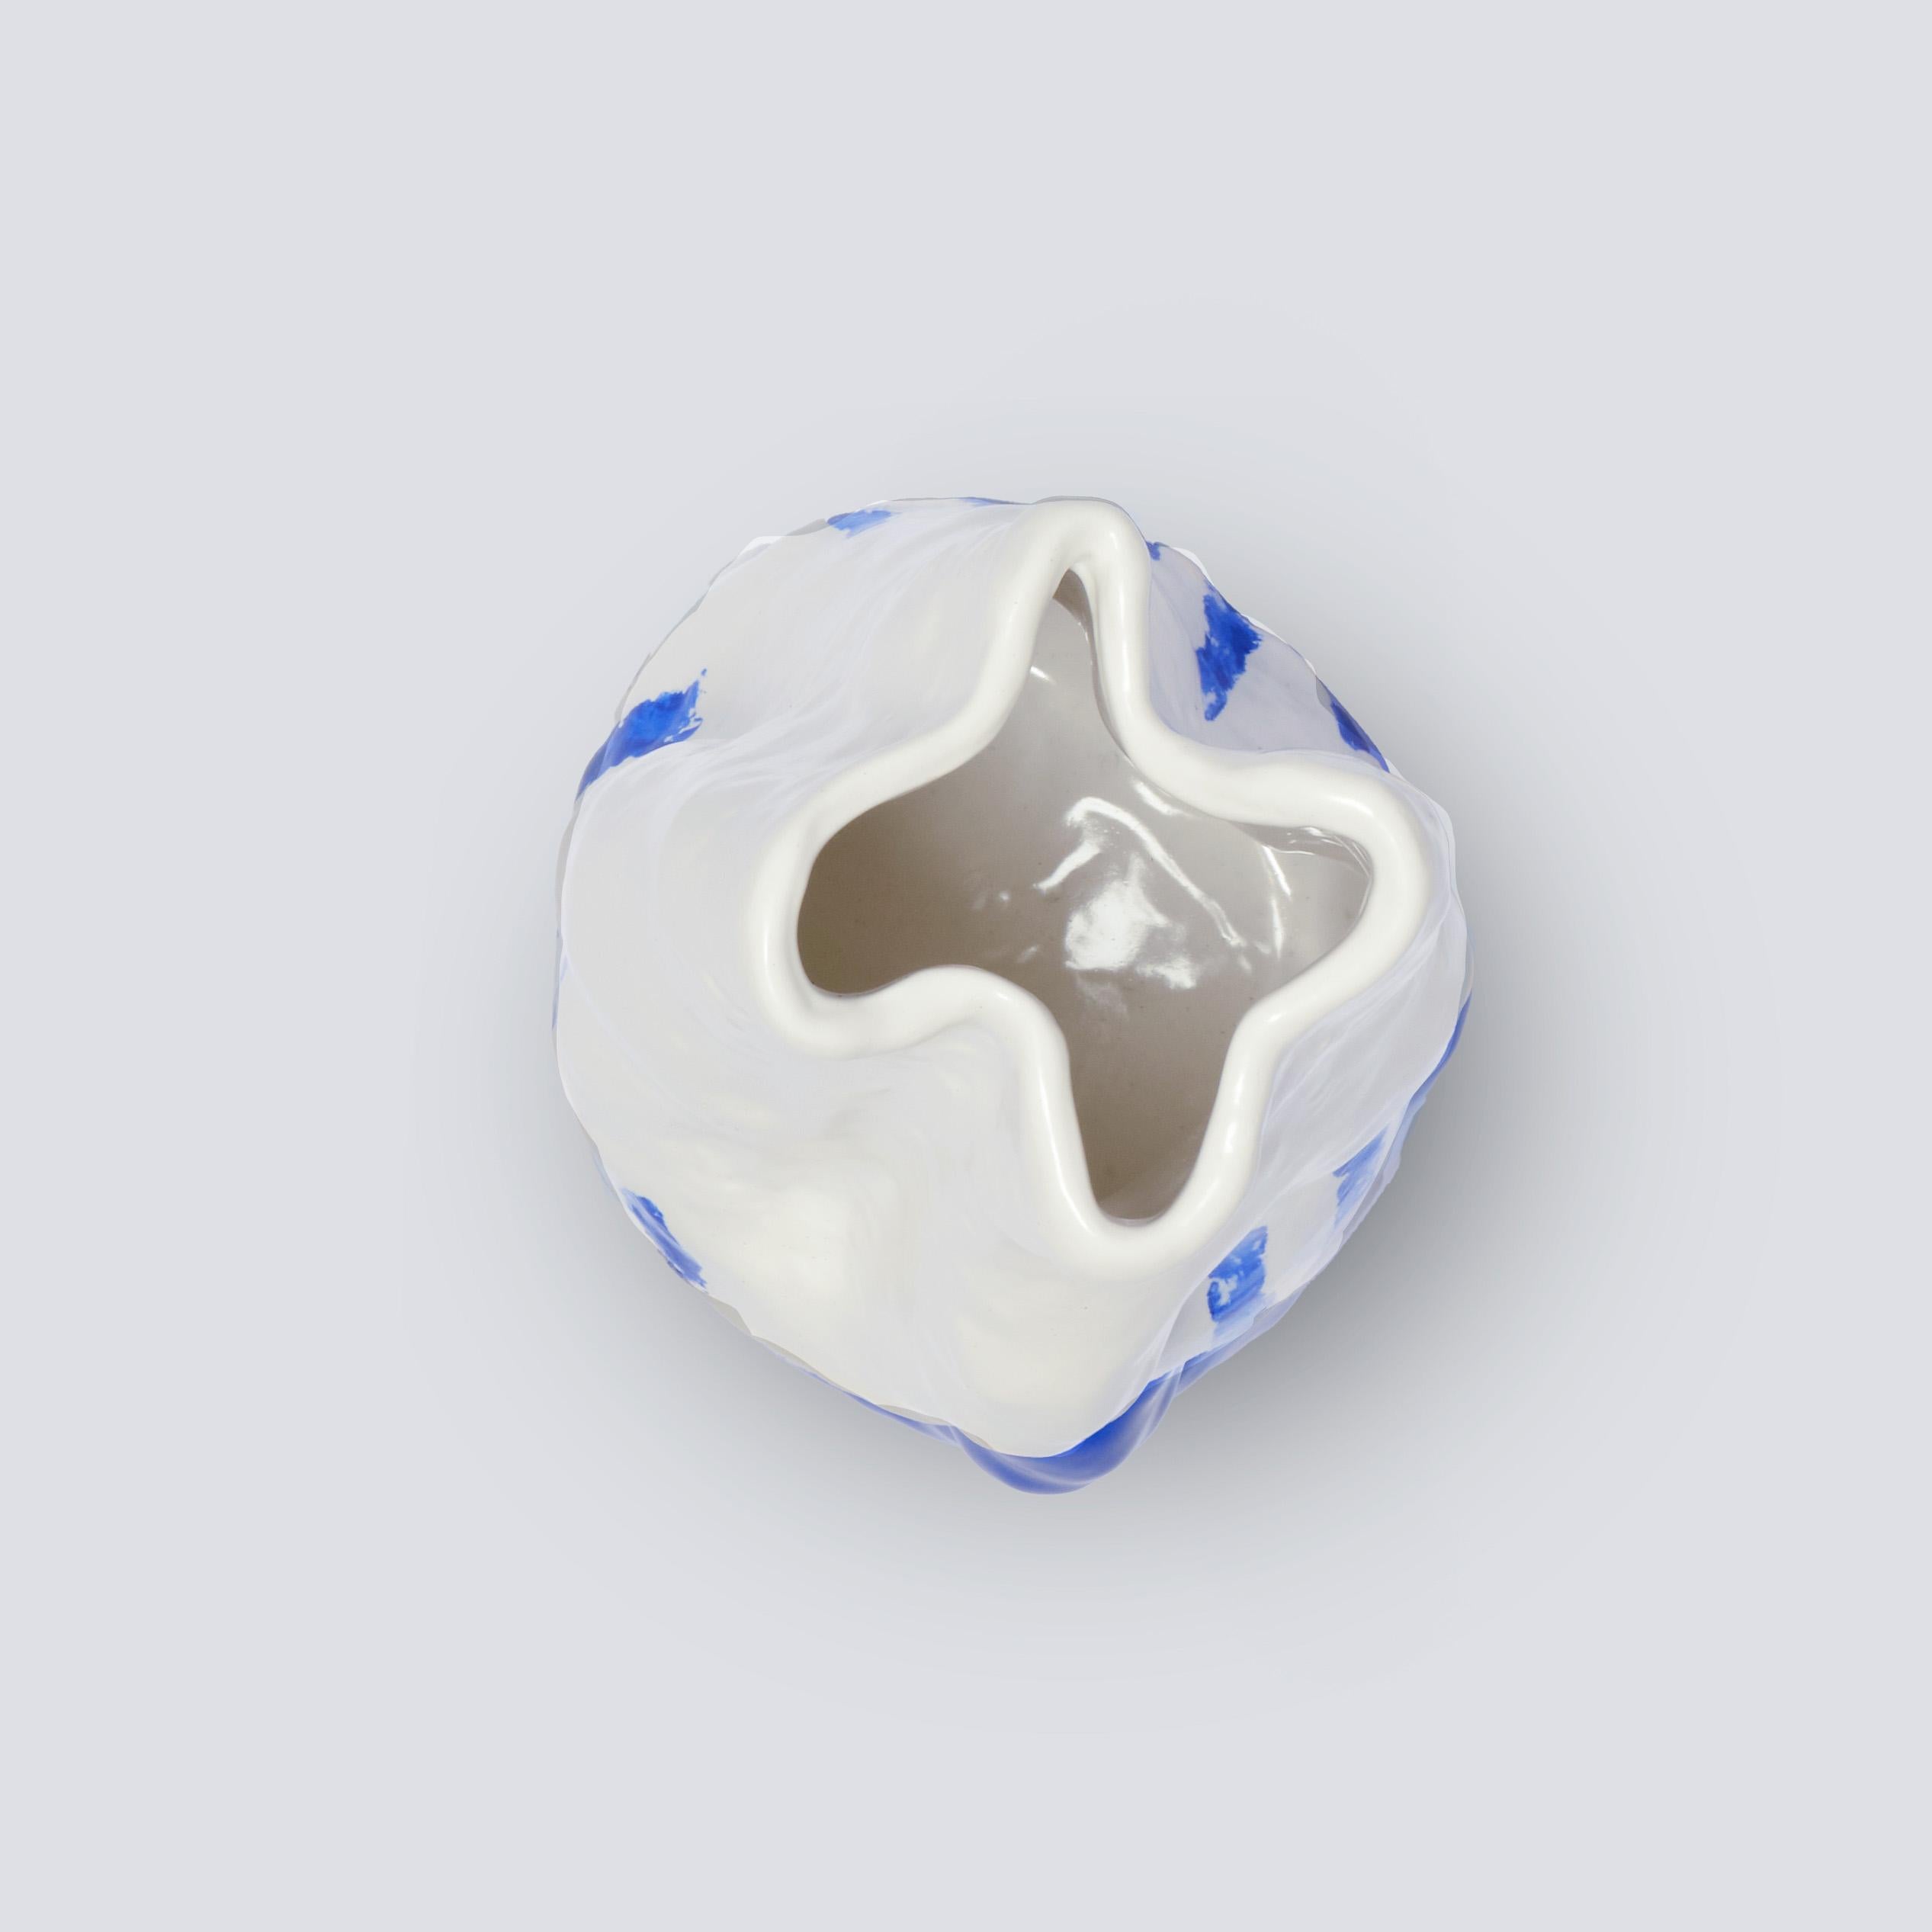 Hand-Crafted Hand-crafted Porcelain White and Blue Georgia Vase For Sale